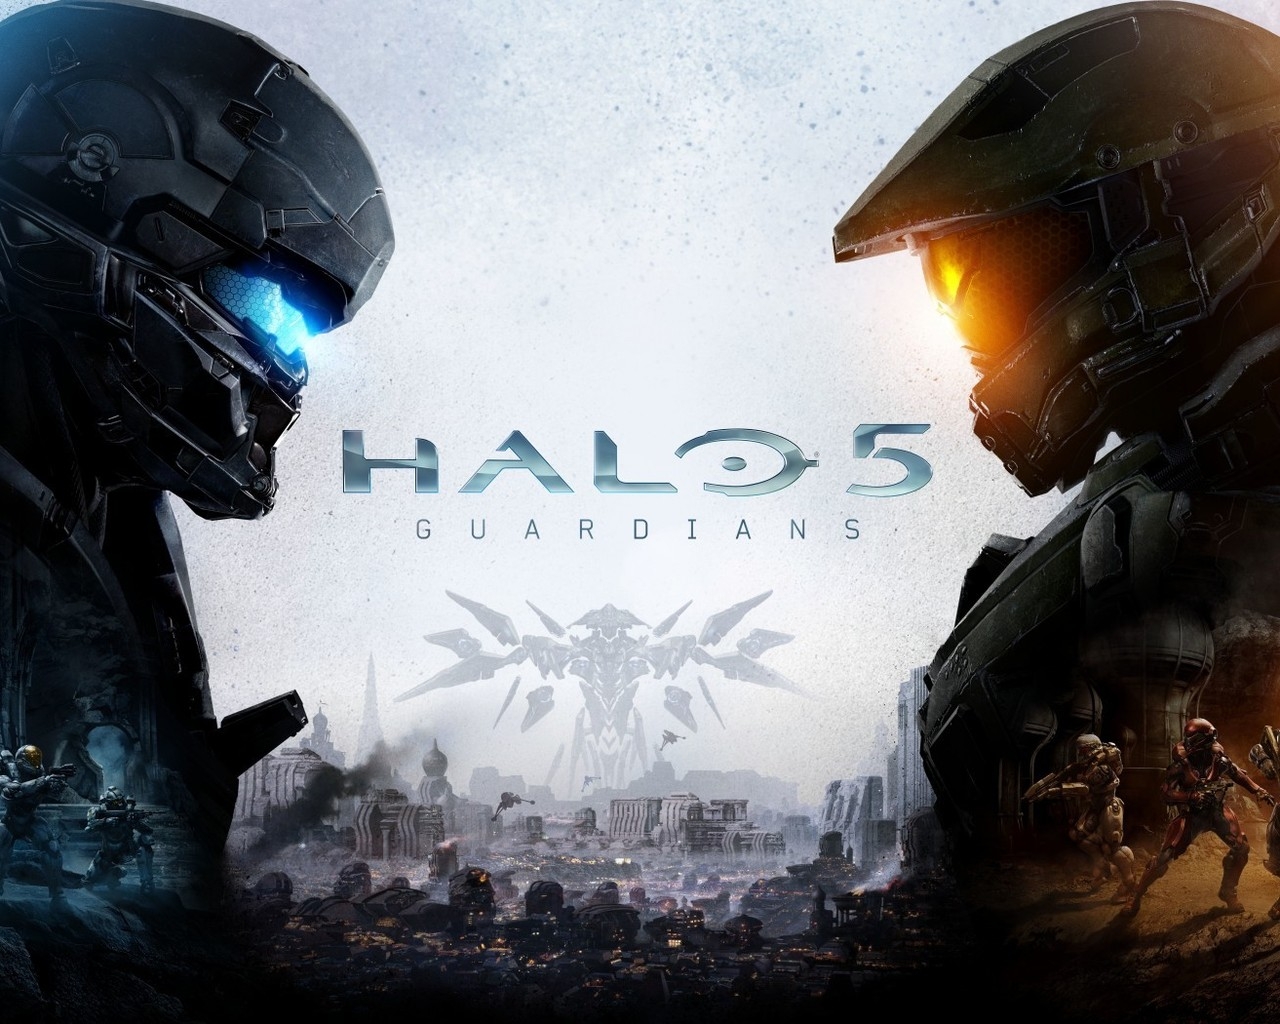 Halo 5 Guardians Game for 1280 x 1024 resolution